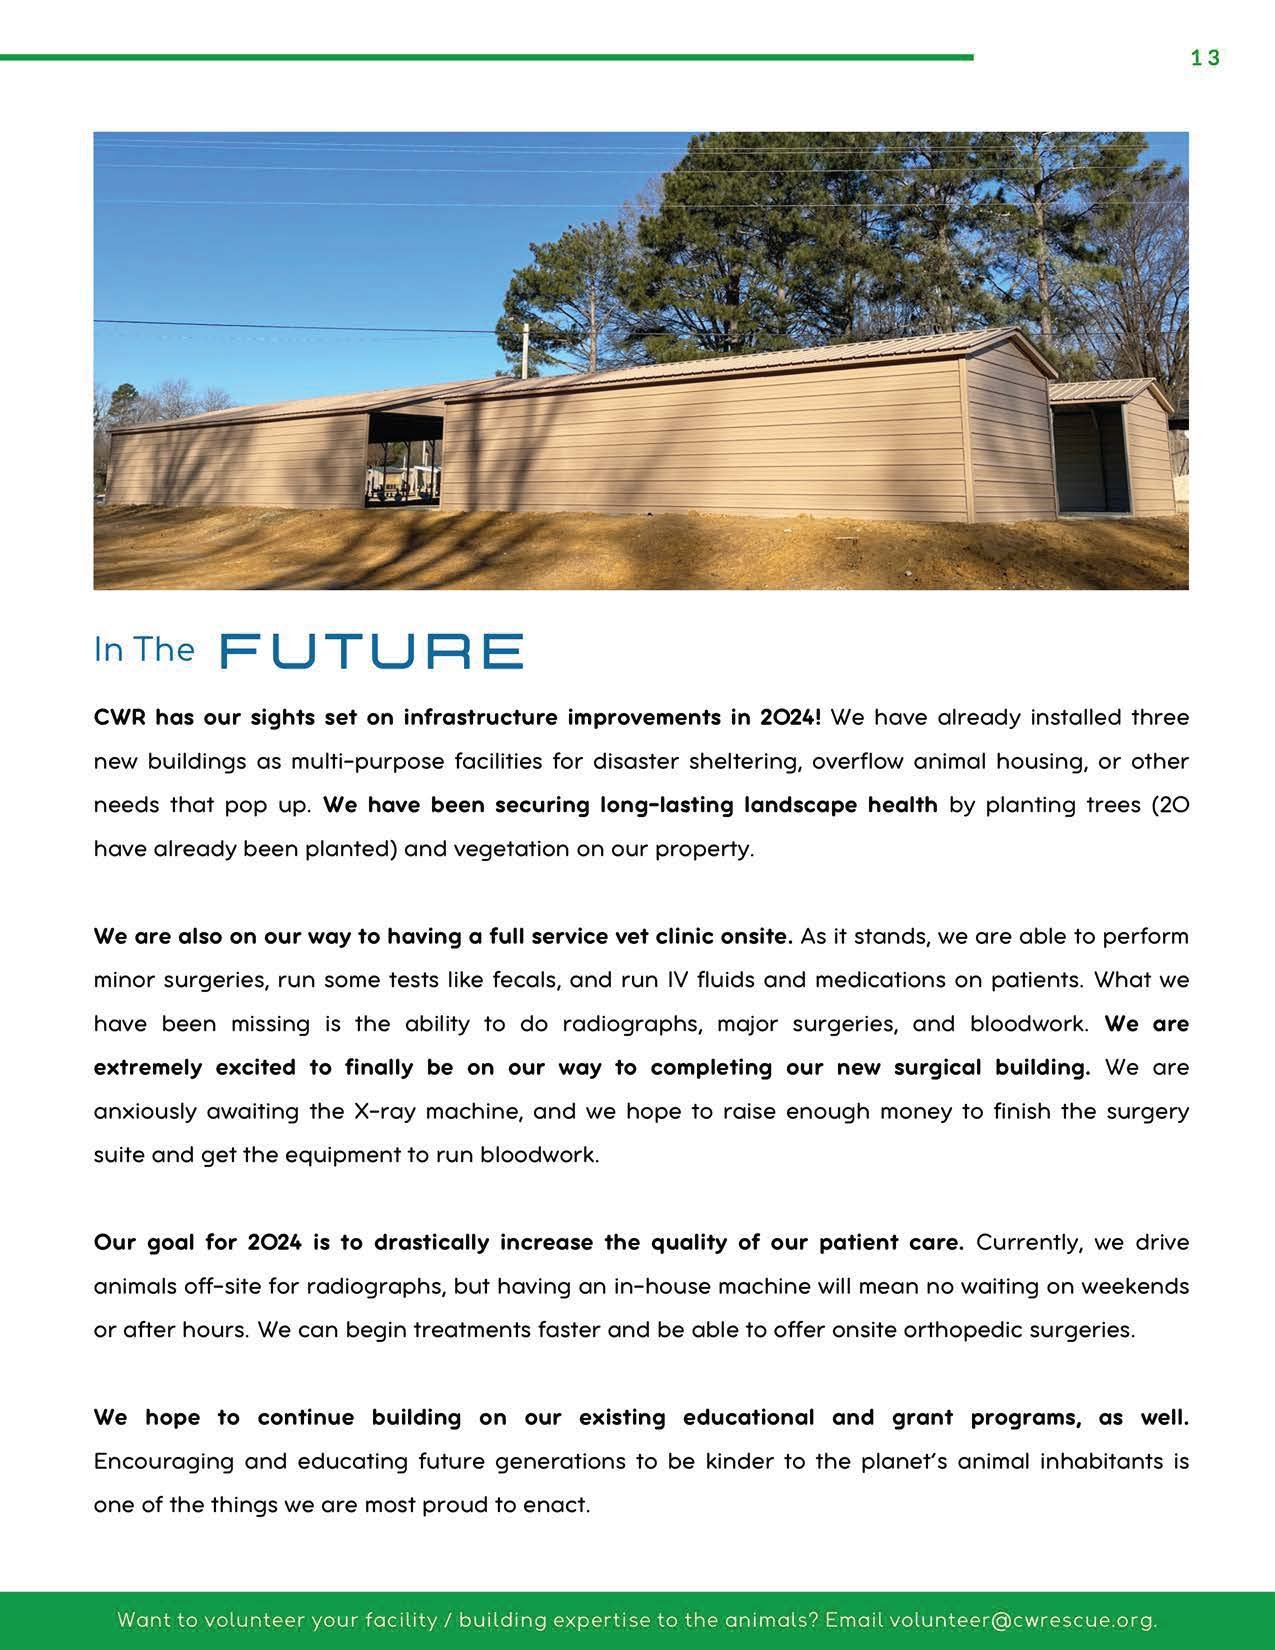 CWR 2023 Annual Report - compressed_Page_14.jpg